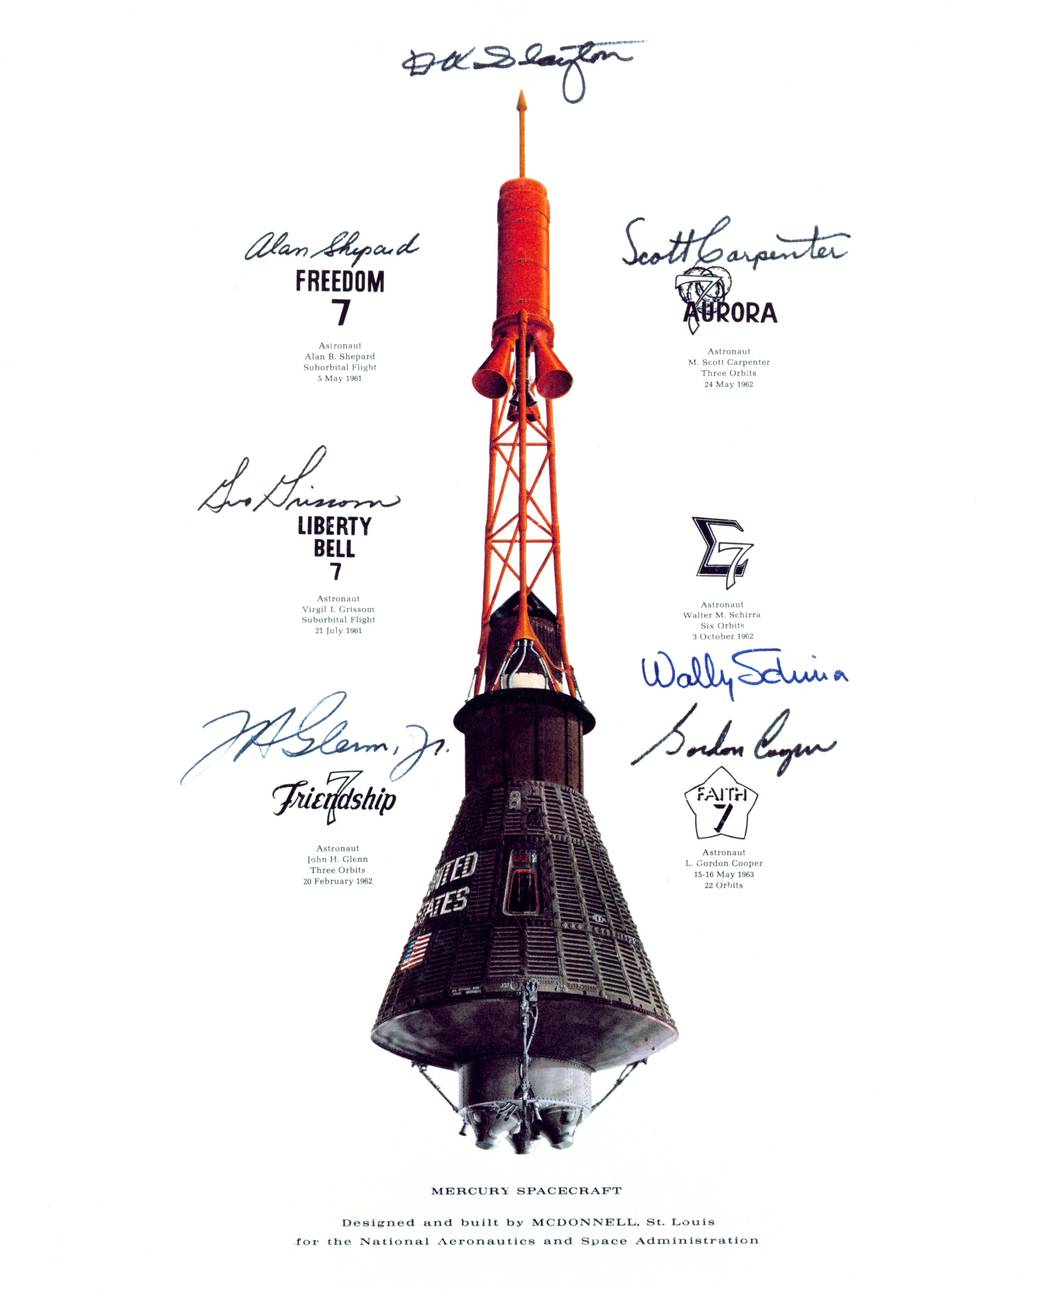 Insignias from each of six manned Mercury 7 missions and autographs of the original seven NASA astronauts.